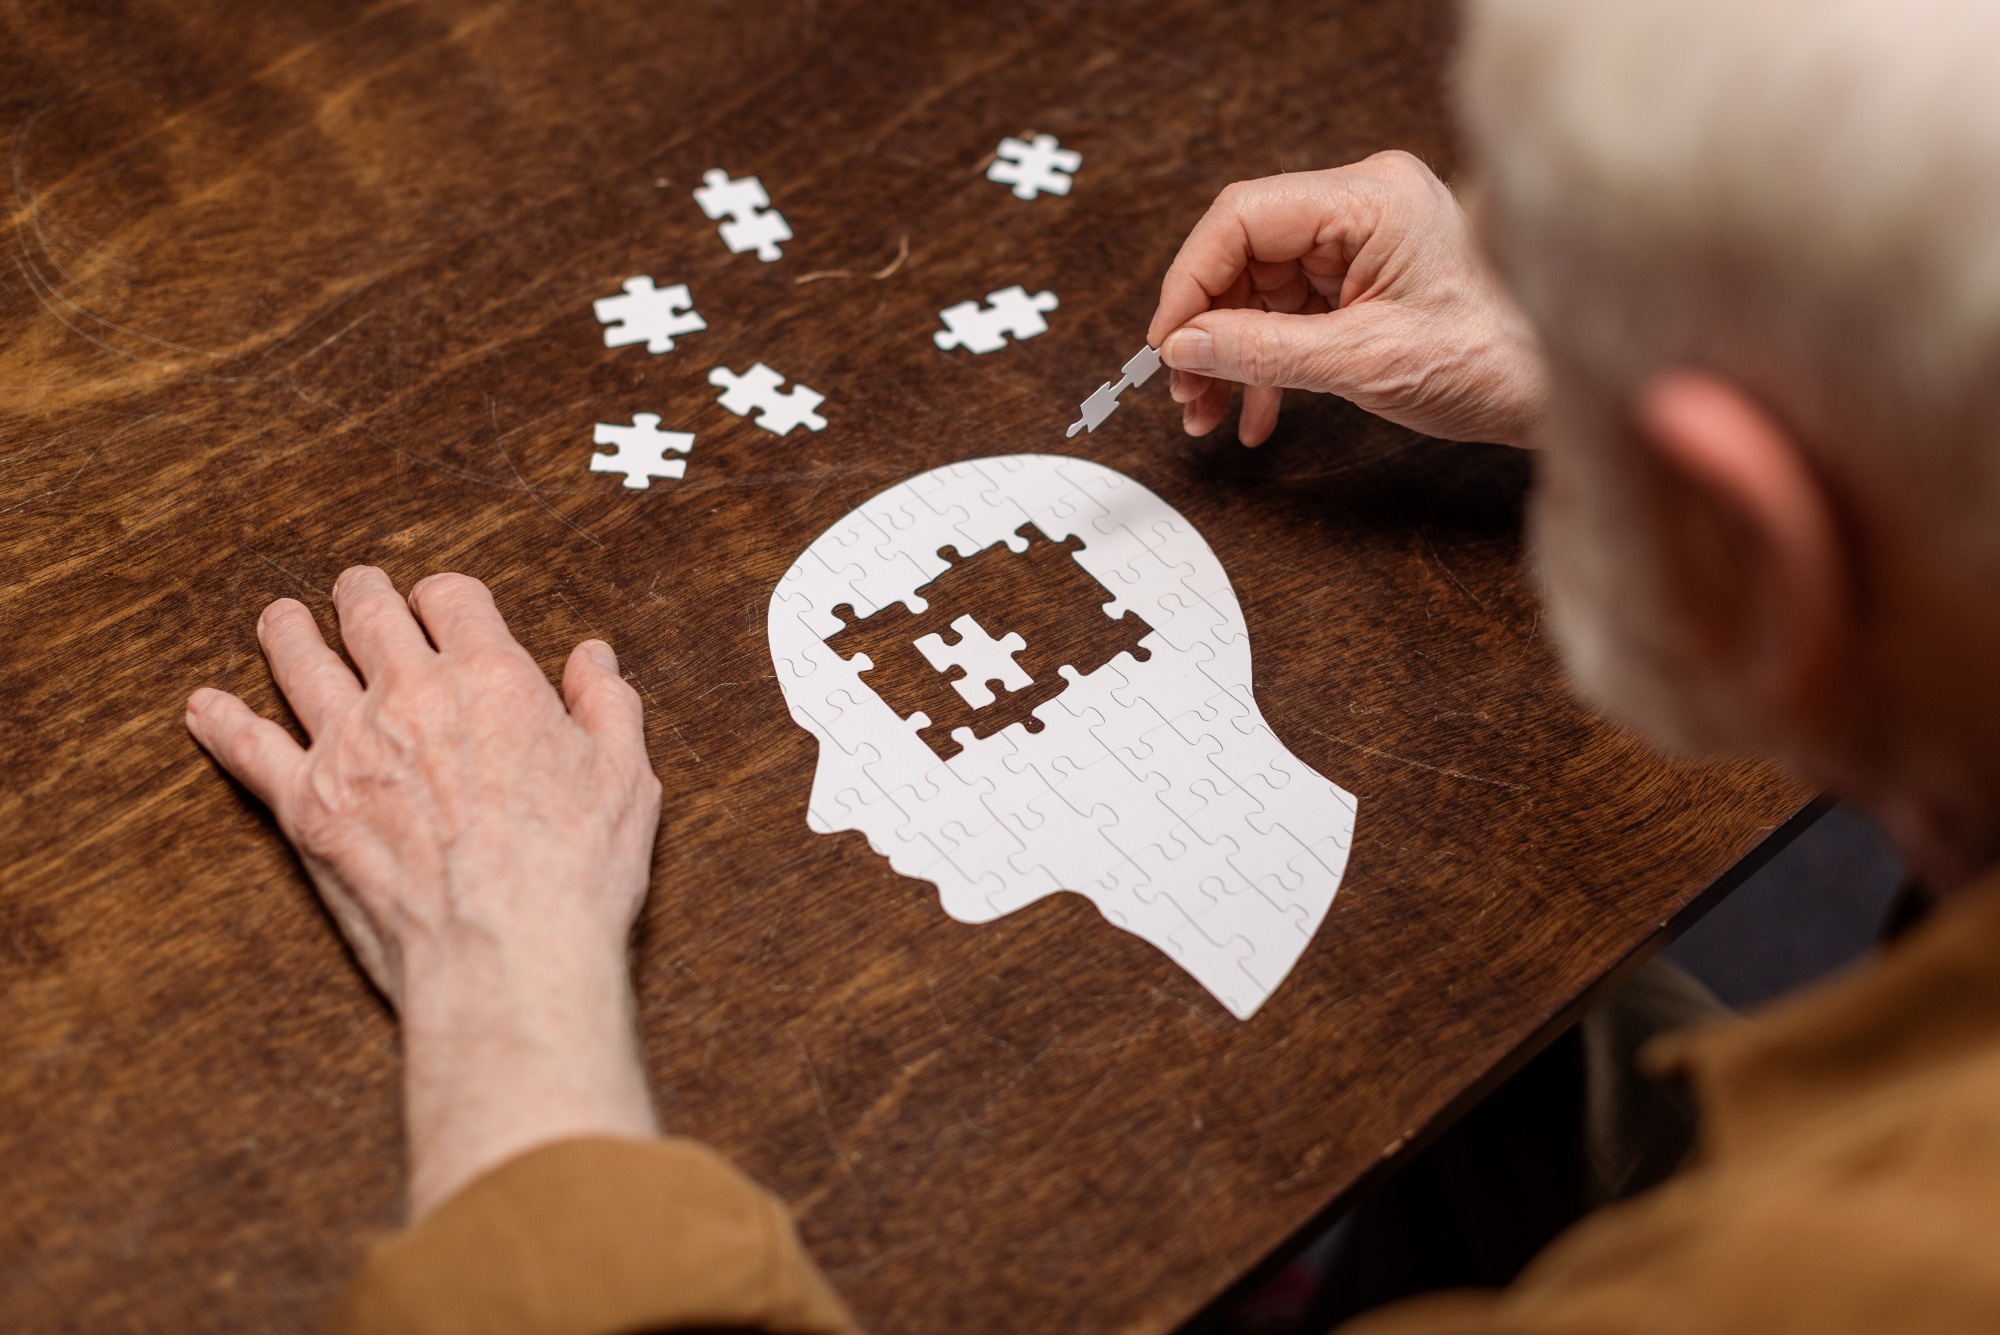 Study: Hospital-Diagnosed Infections, Autoimmune Diseases, and Subsequent Dementia Incidence. Image Credit: LightField Studios/Shutterstock.com